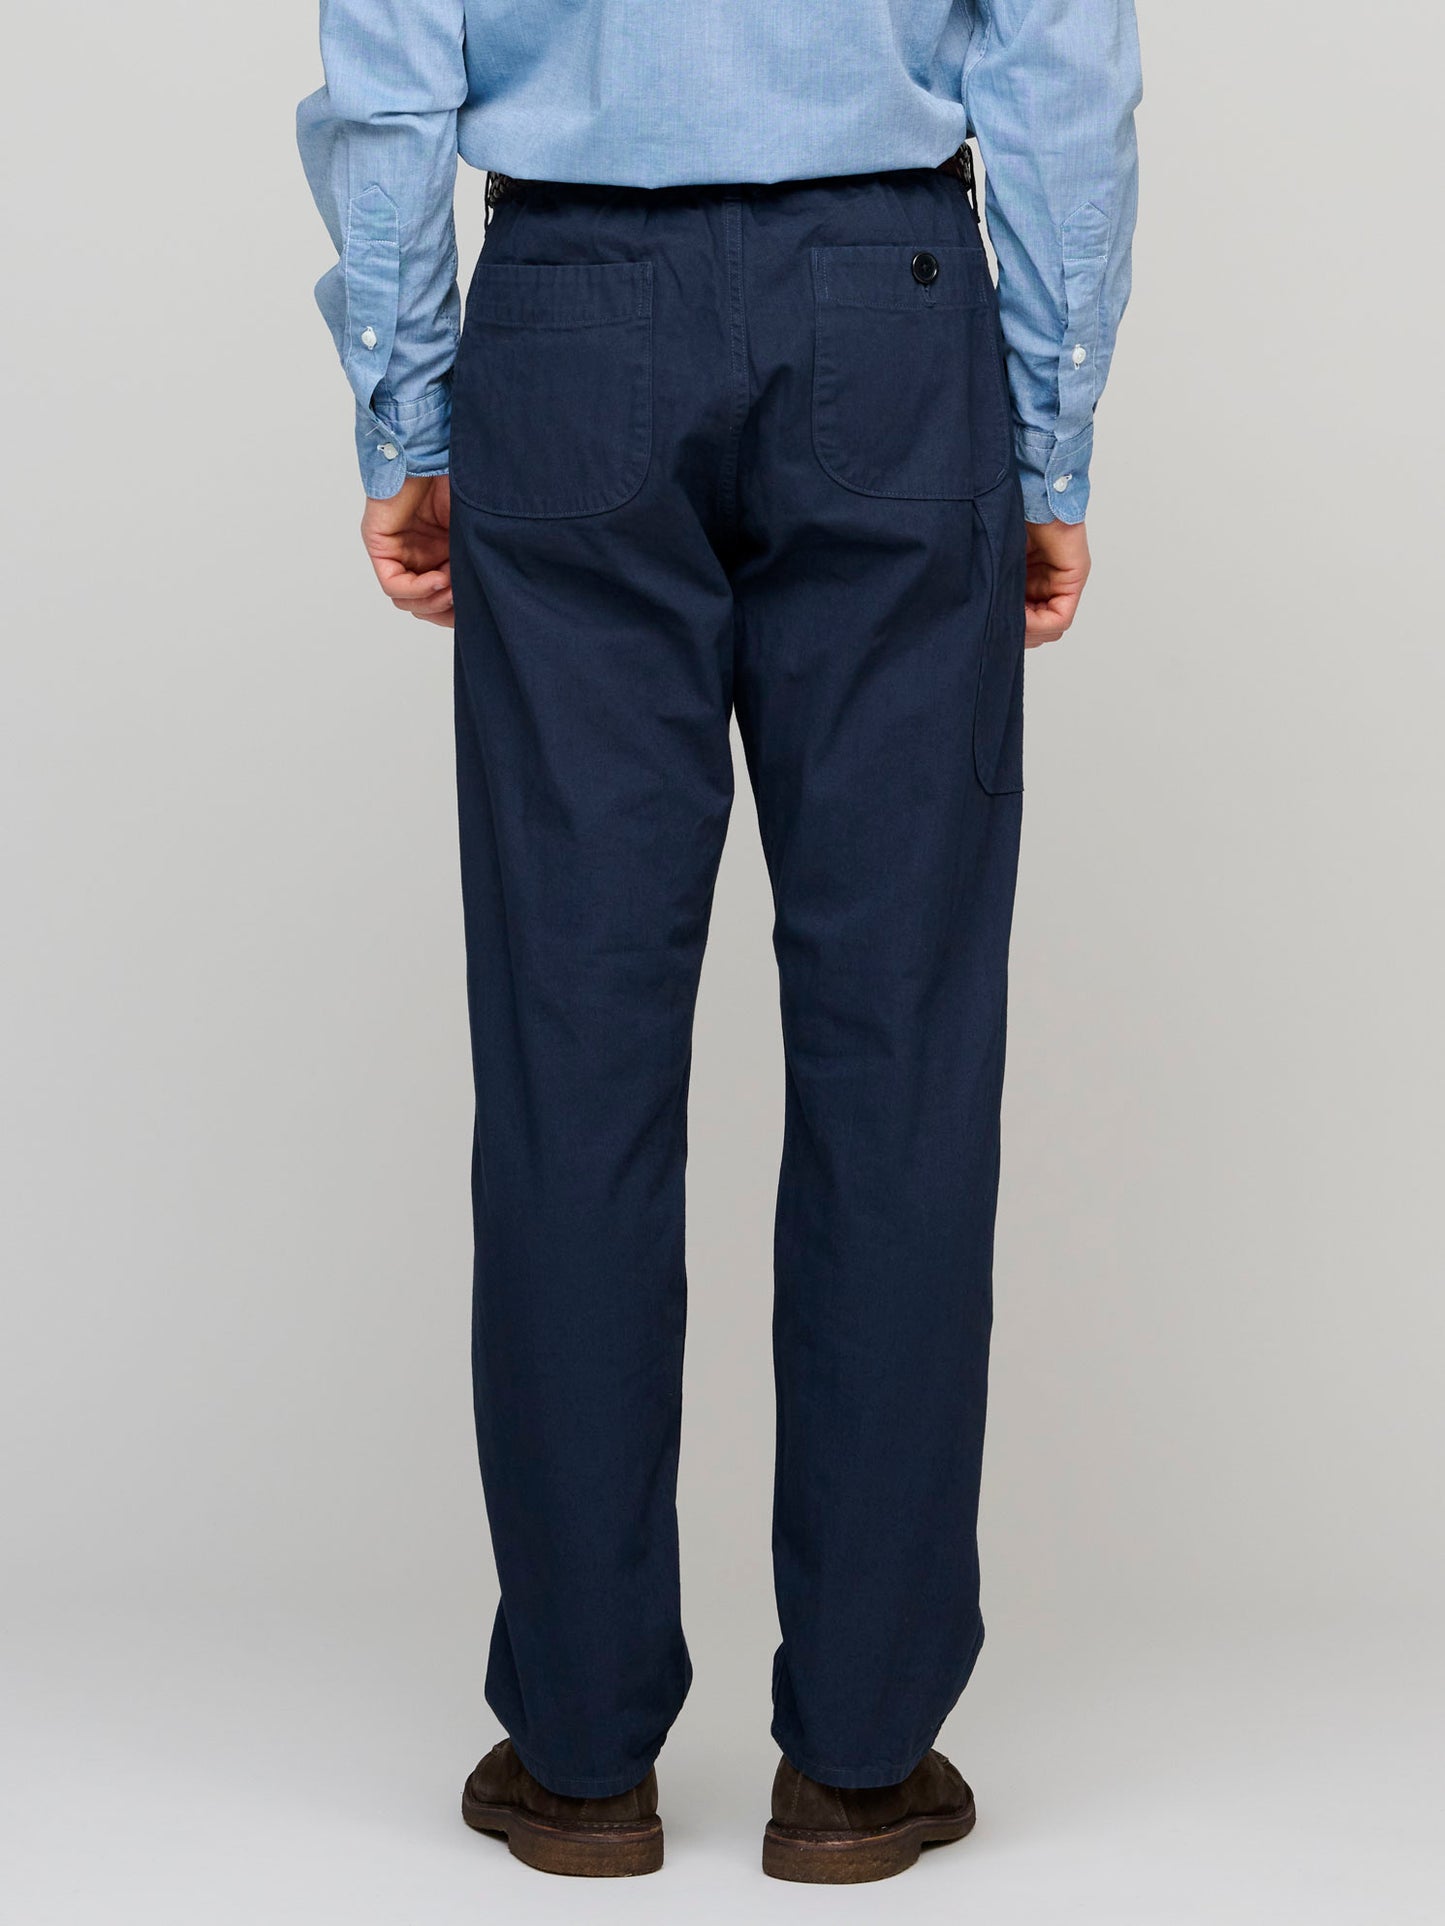 French Work Pants, Navy